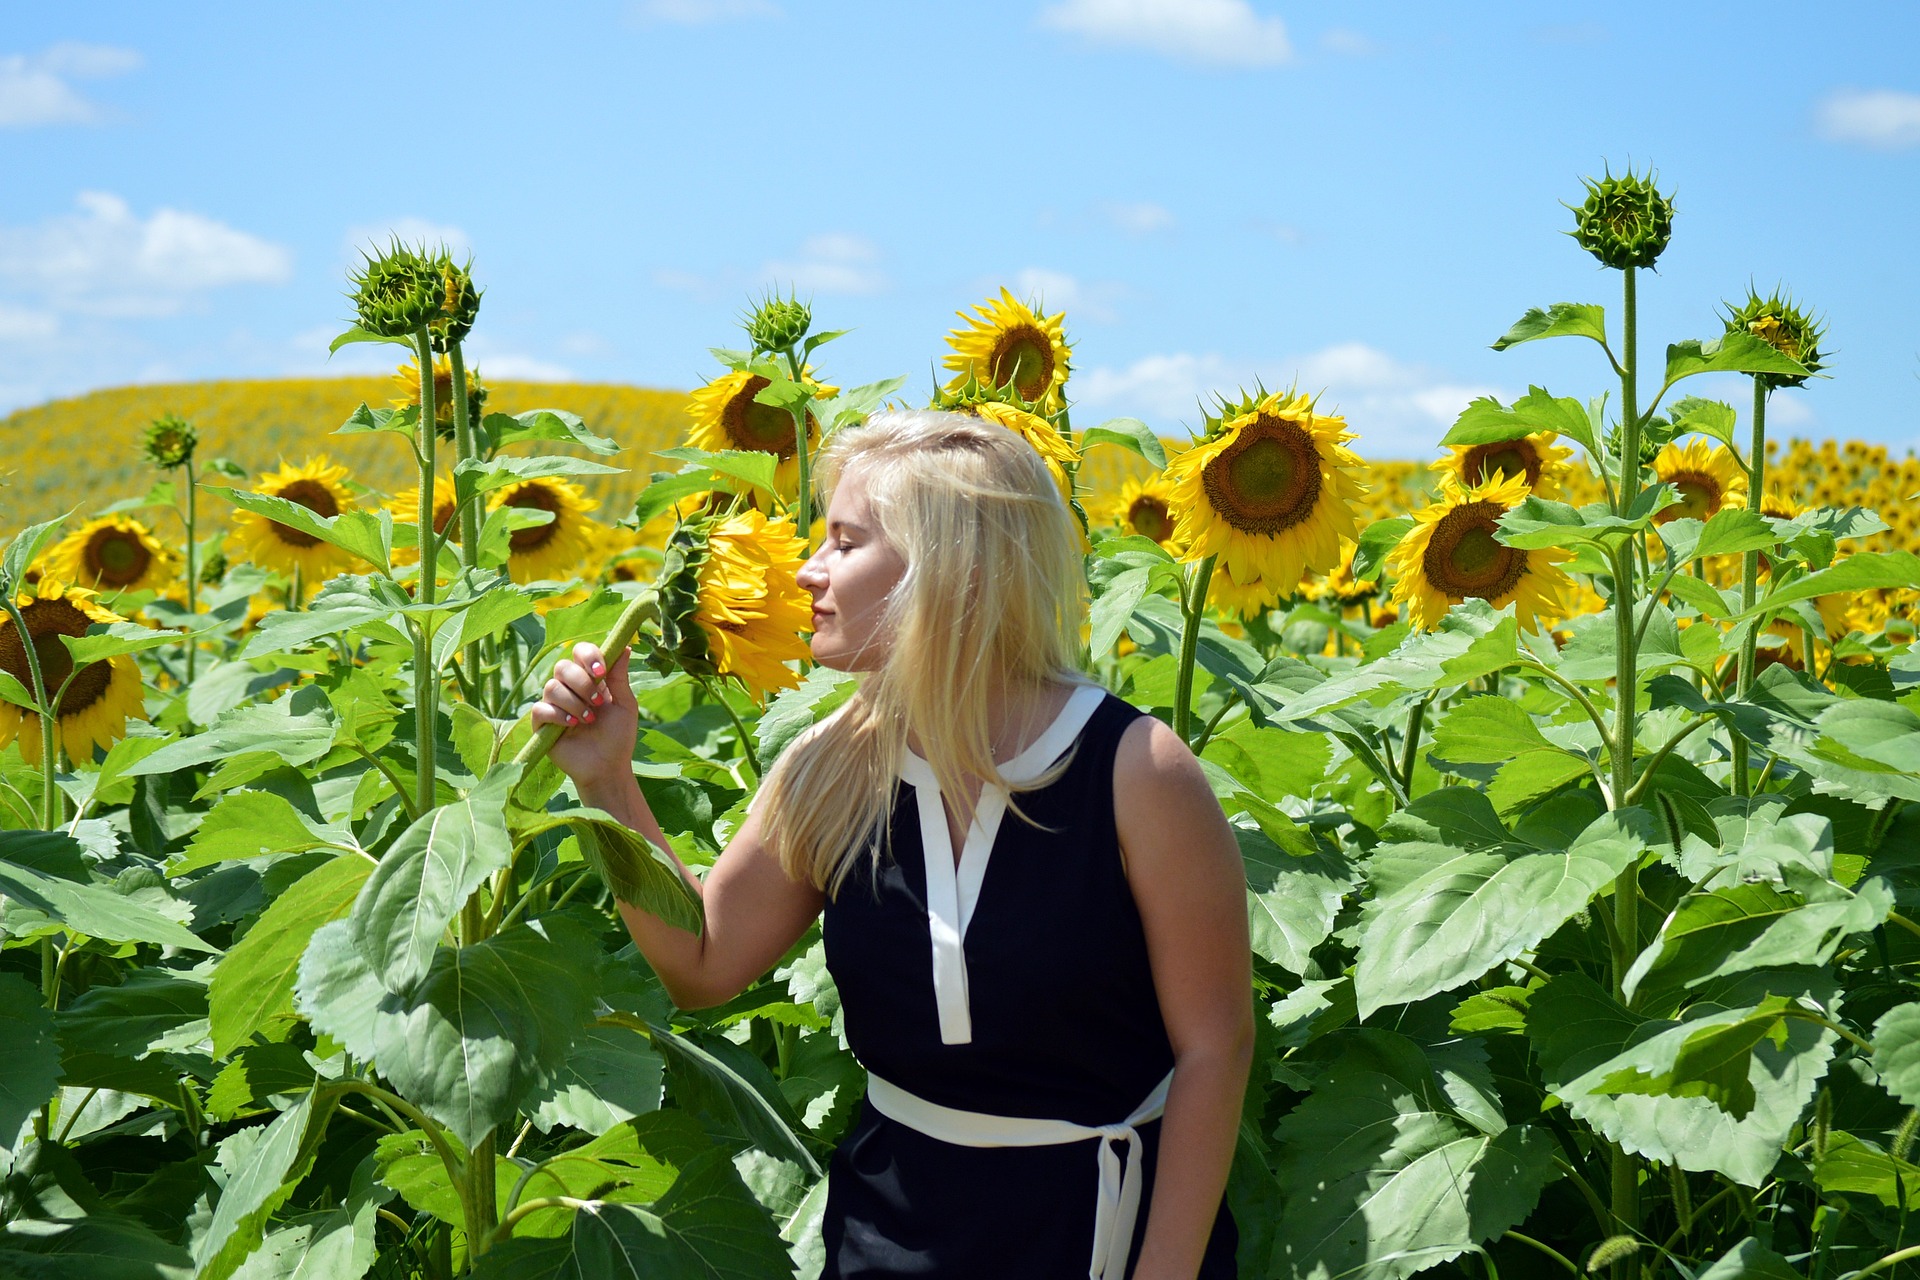 Blonde girl smelling a sunflower flower on a pretty day.